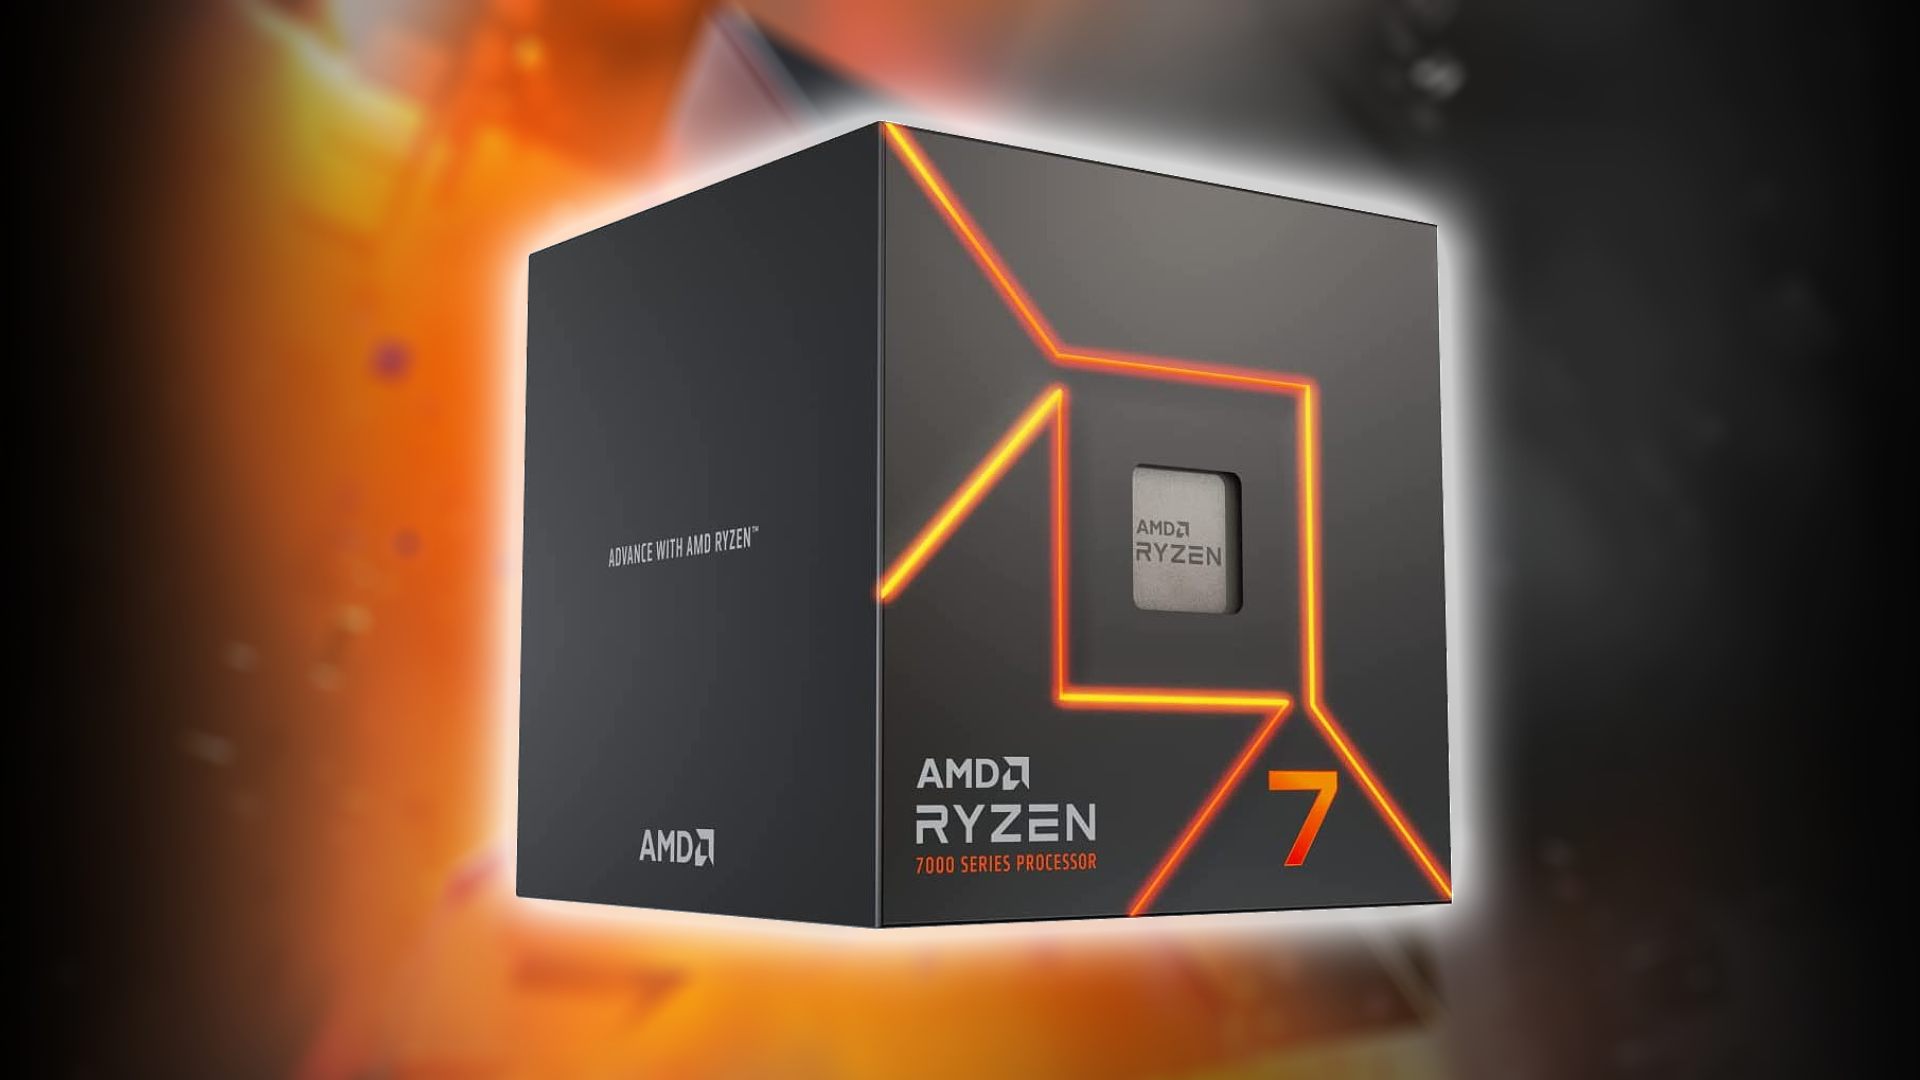 AMD Ryzen 7000 gaming CPU range is now available to buy